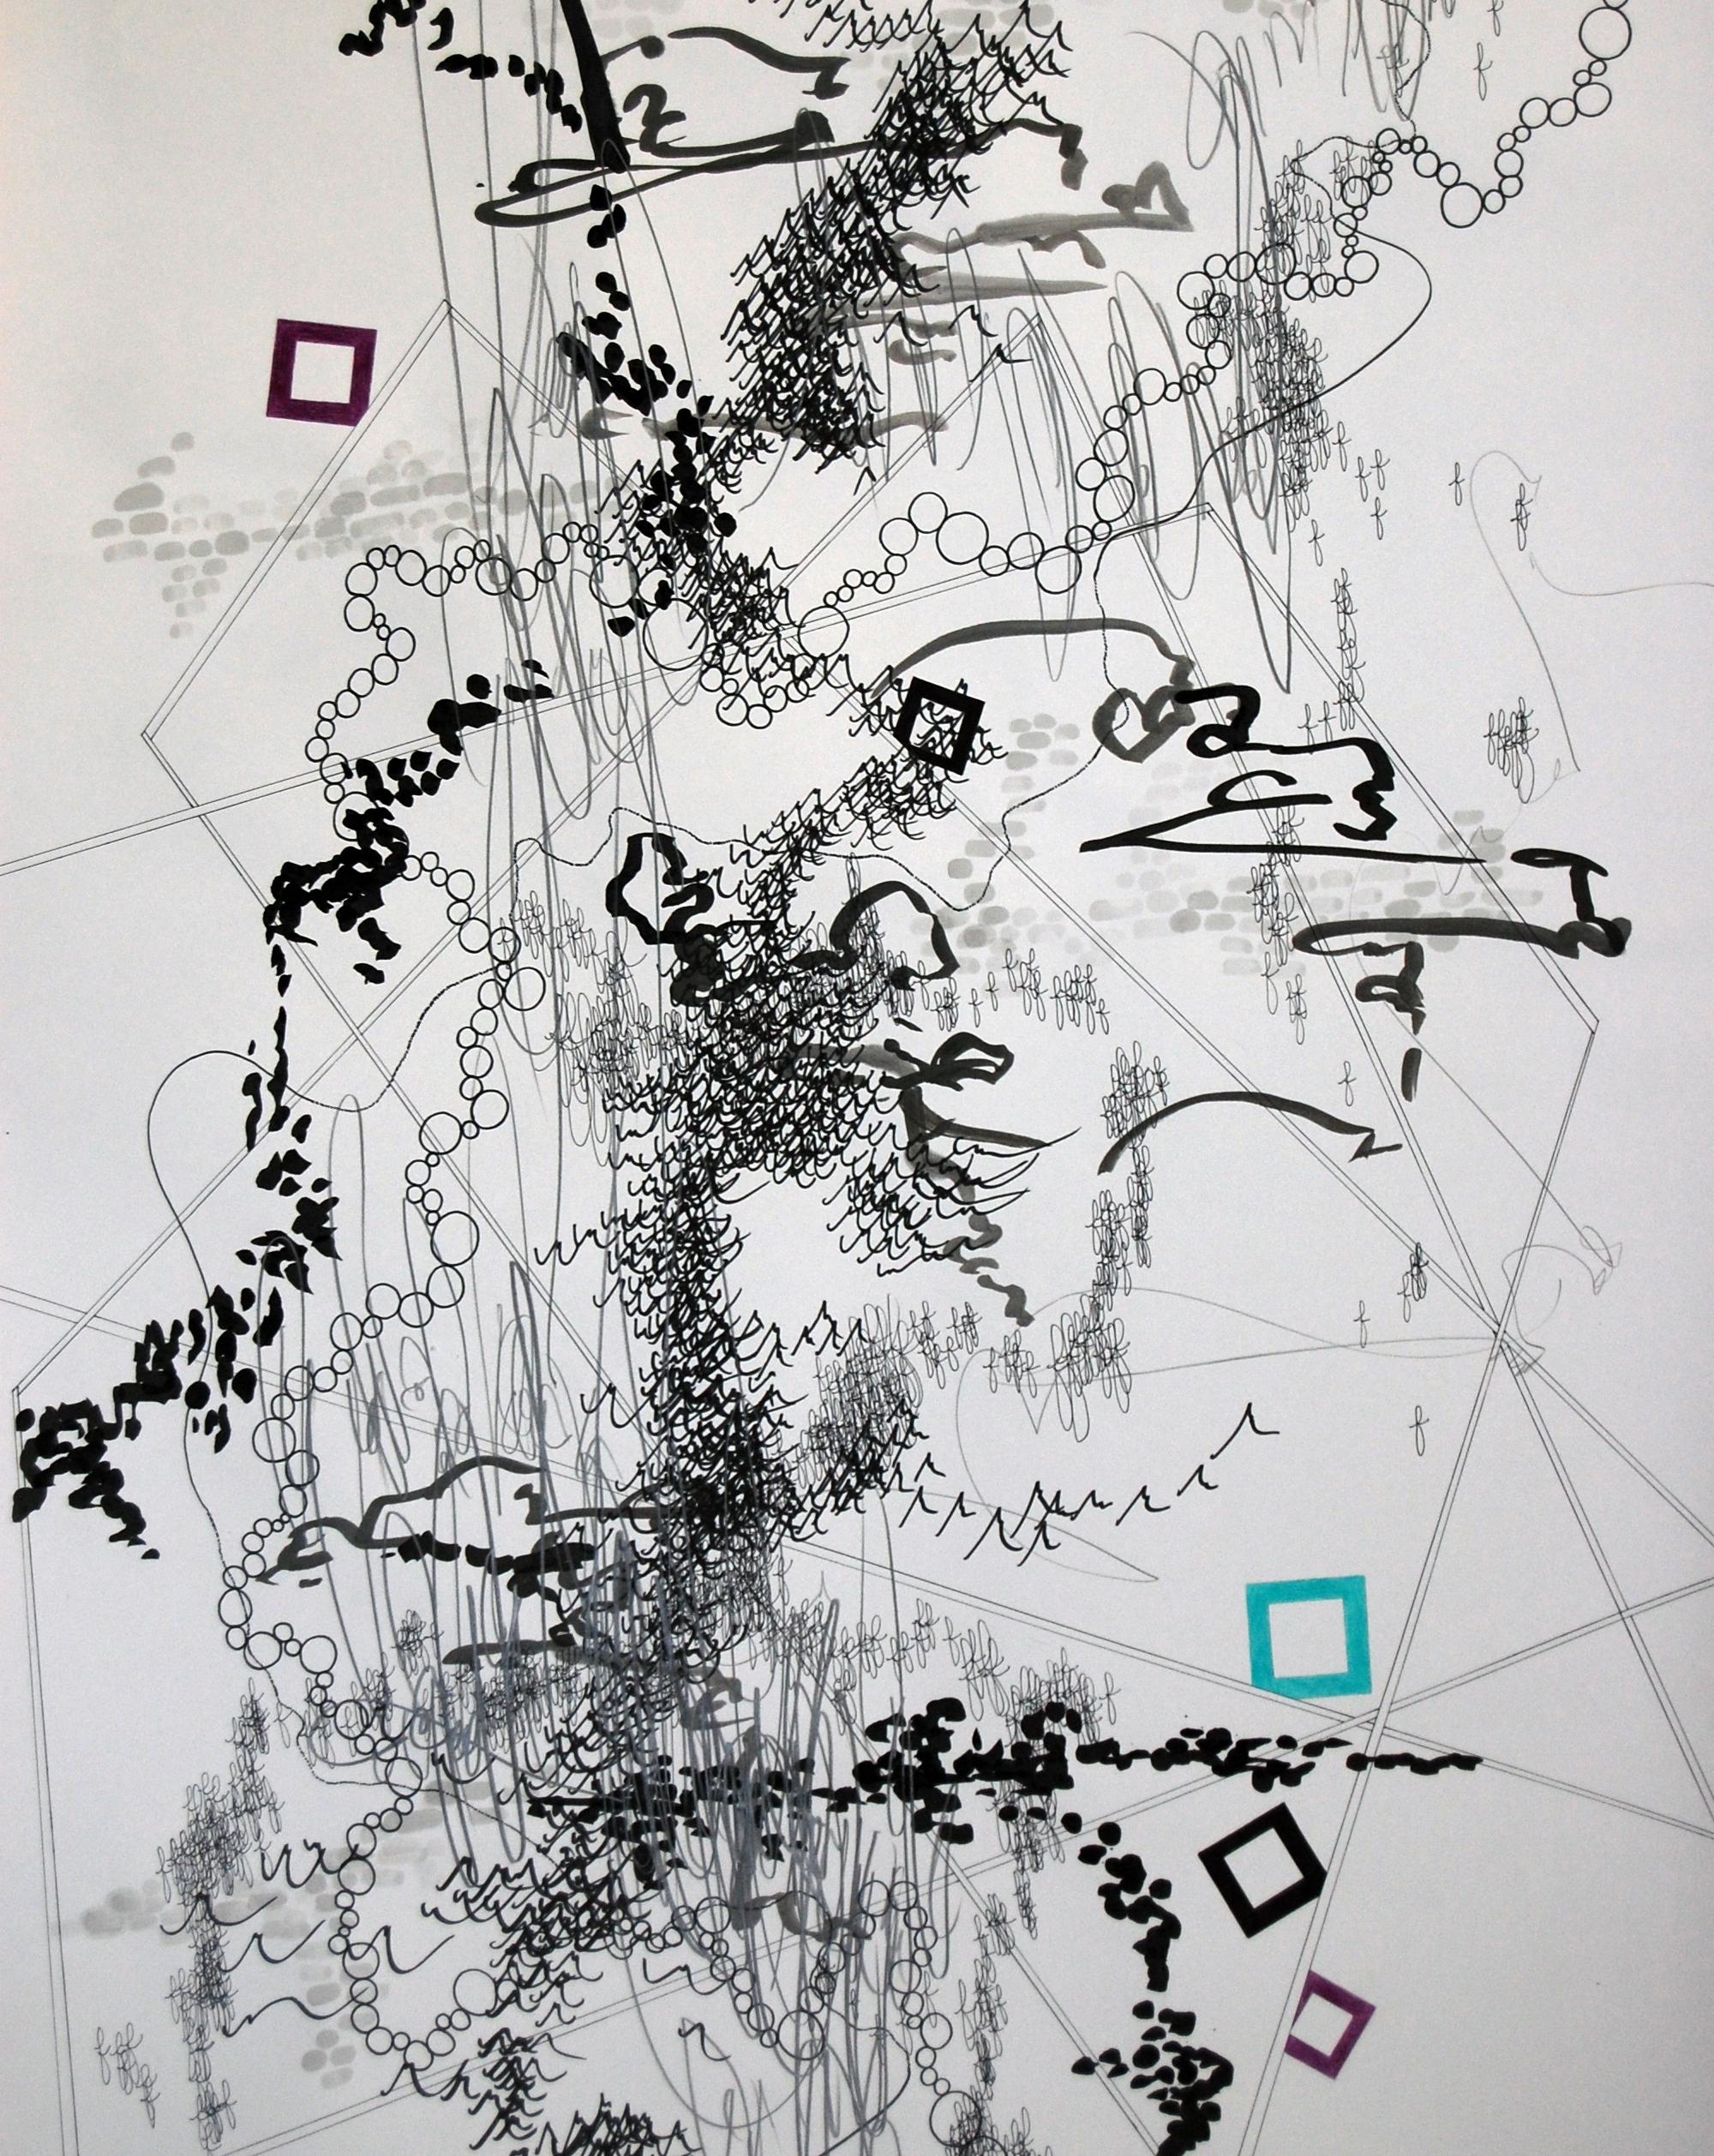 Passing Through, Drawing, Pen & Ink on Paper - Art by Allison Long Hardy